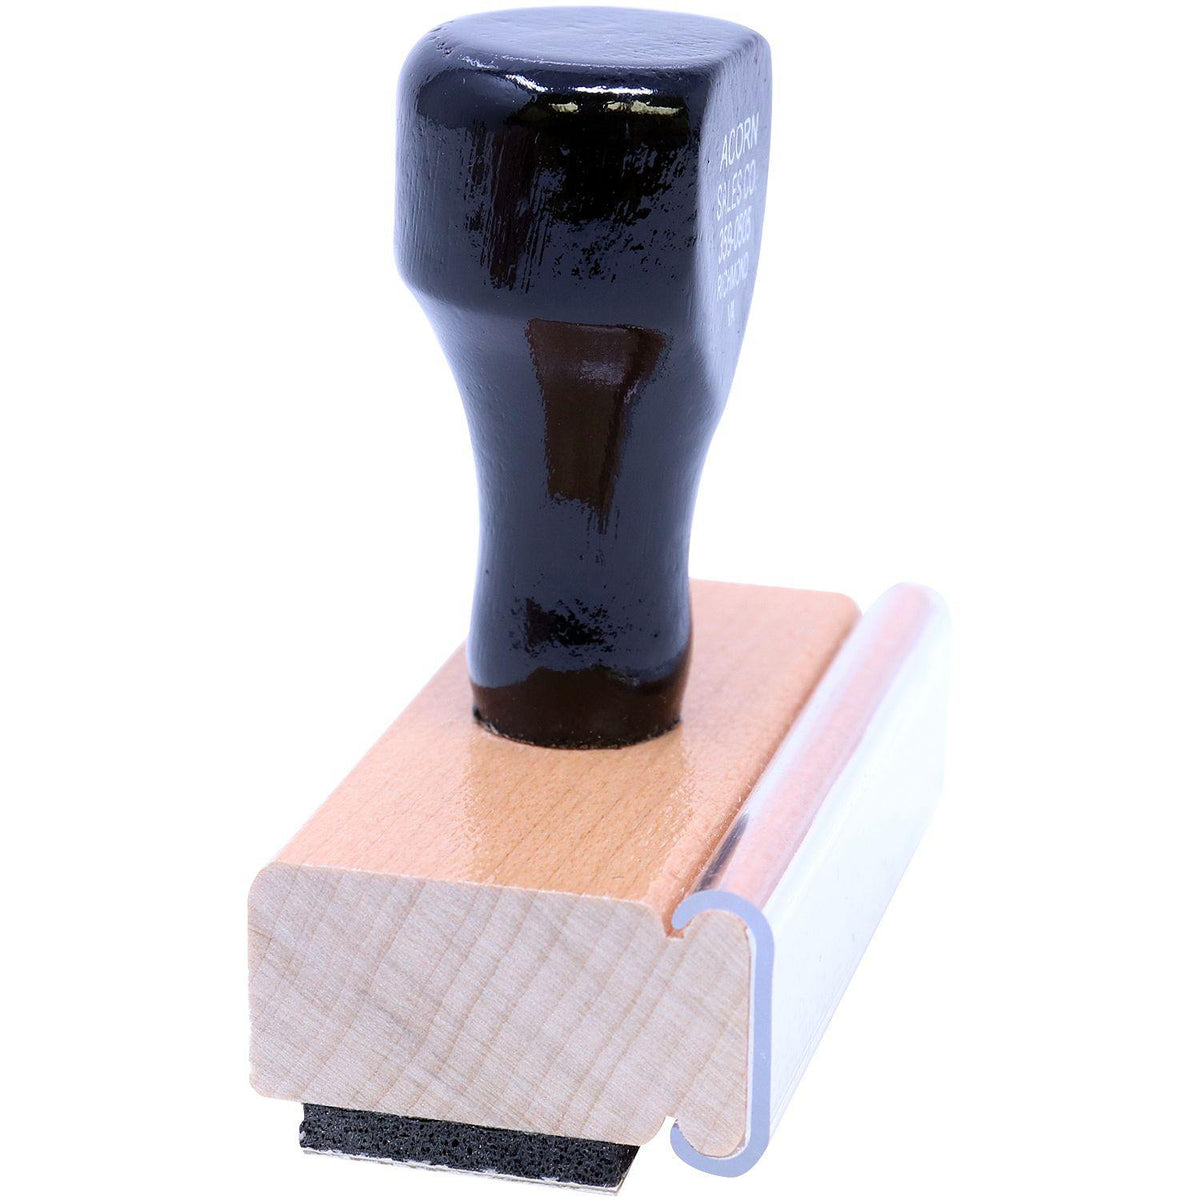 Side View of Large Premedicate Rubber Stamp at an Angle